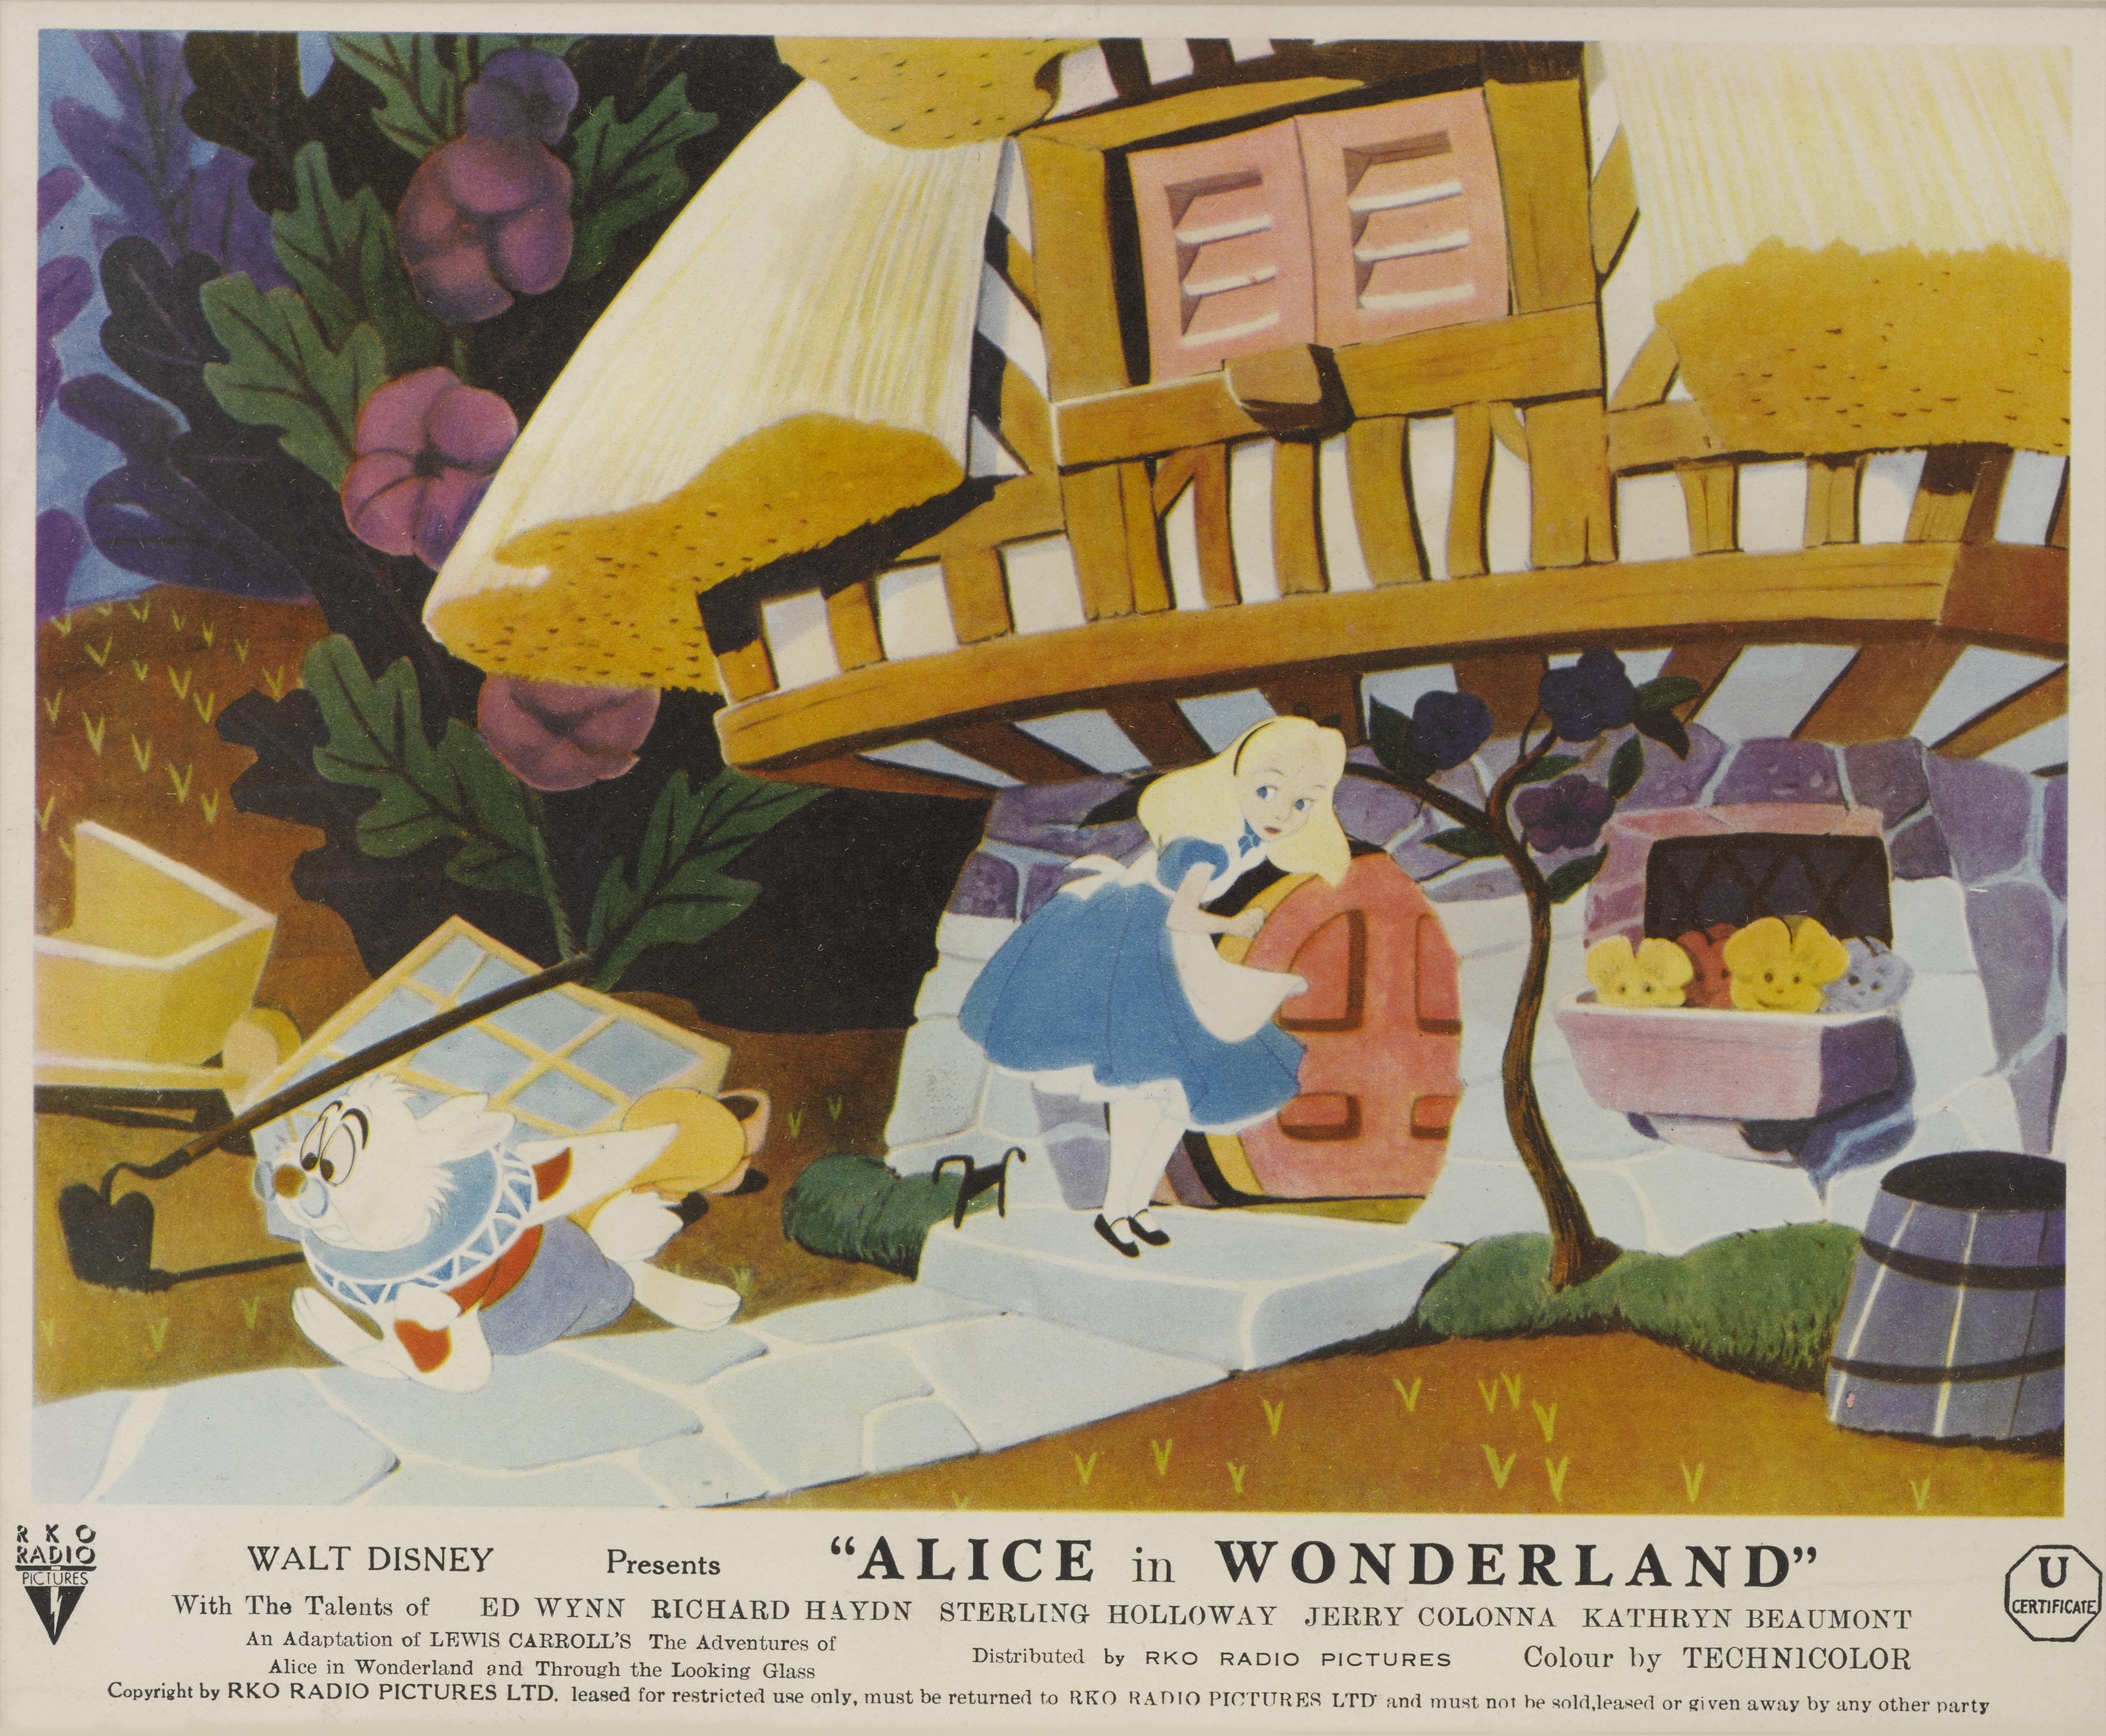 Original British framed front of house card.
Alice in Wonderland was released in 1951 by Walt Disney, and is based on the Alice books by Lewis Carroll. It was the thirteenth animated film that Disney made. Walt Disney had attempted to make the film